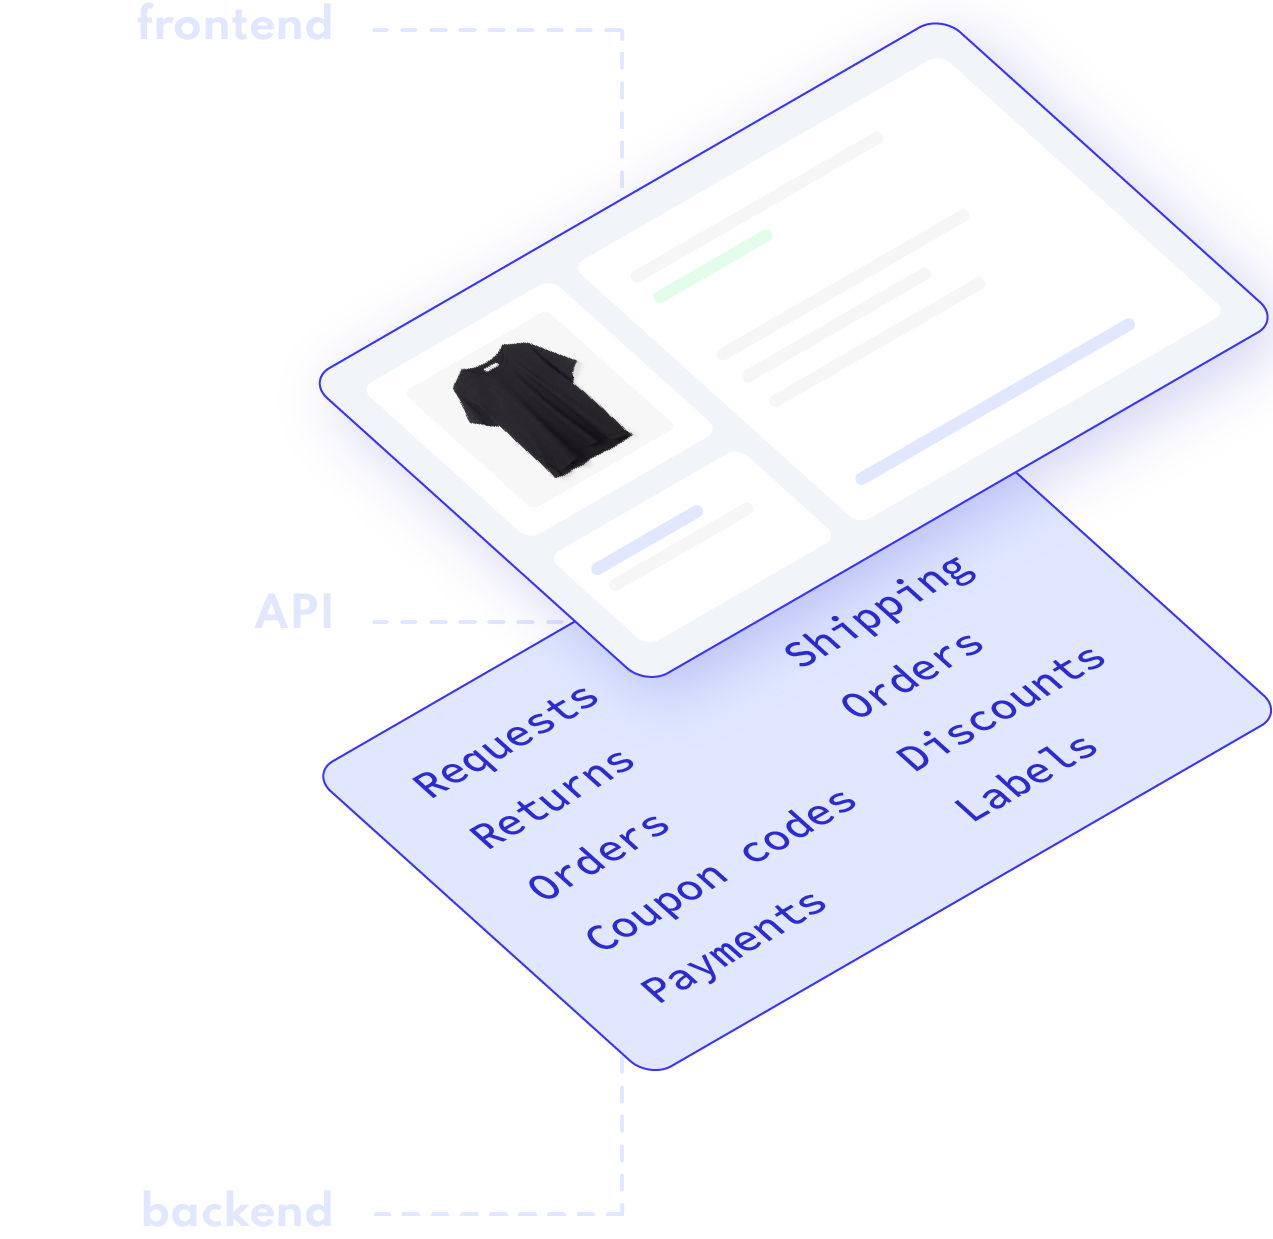 frontend-backend-overview